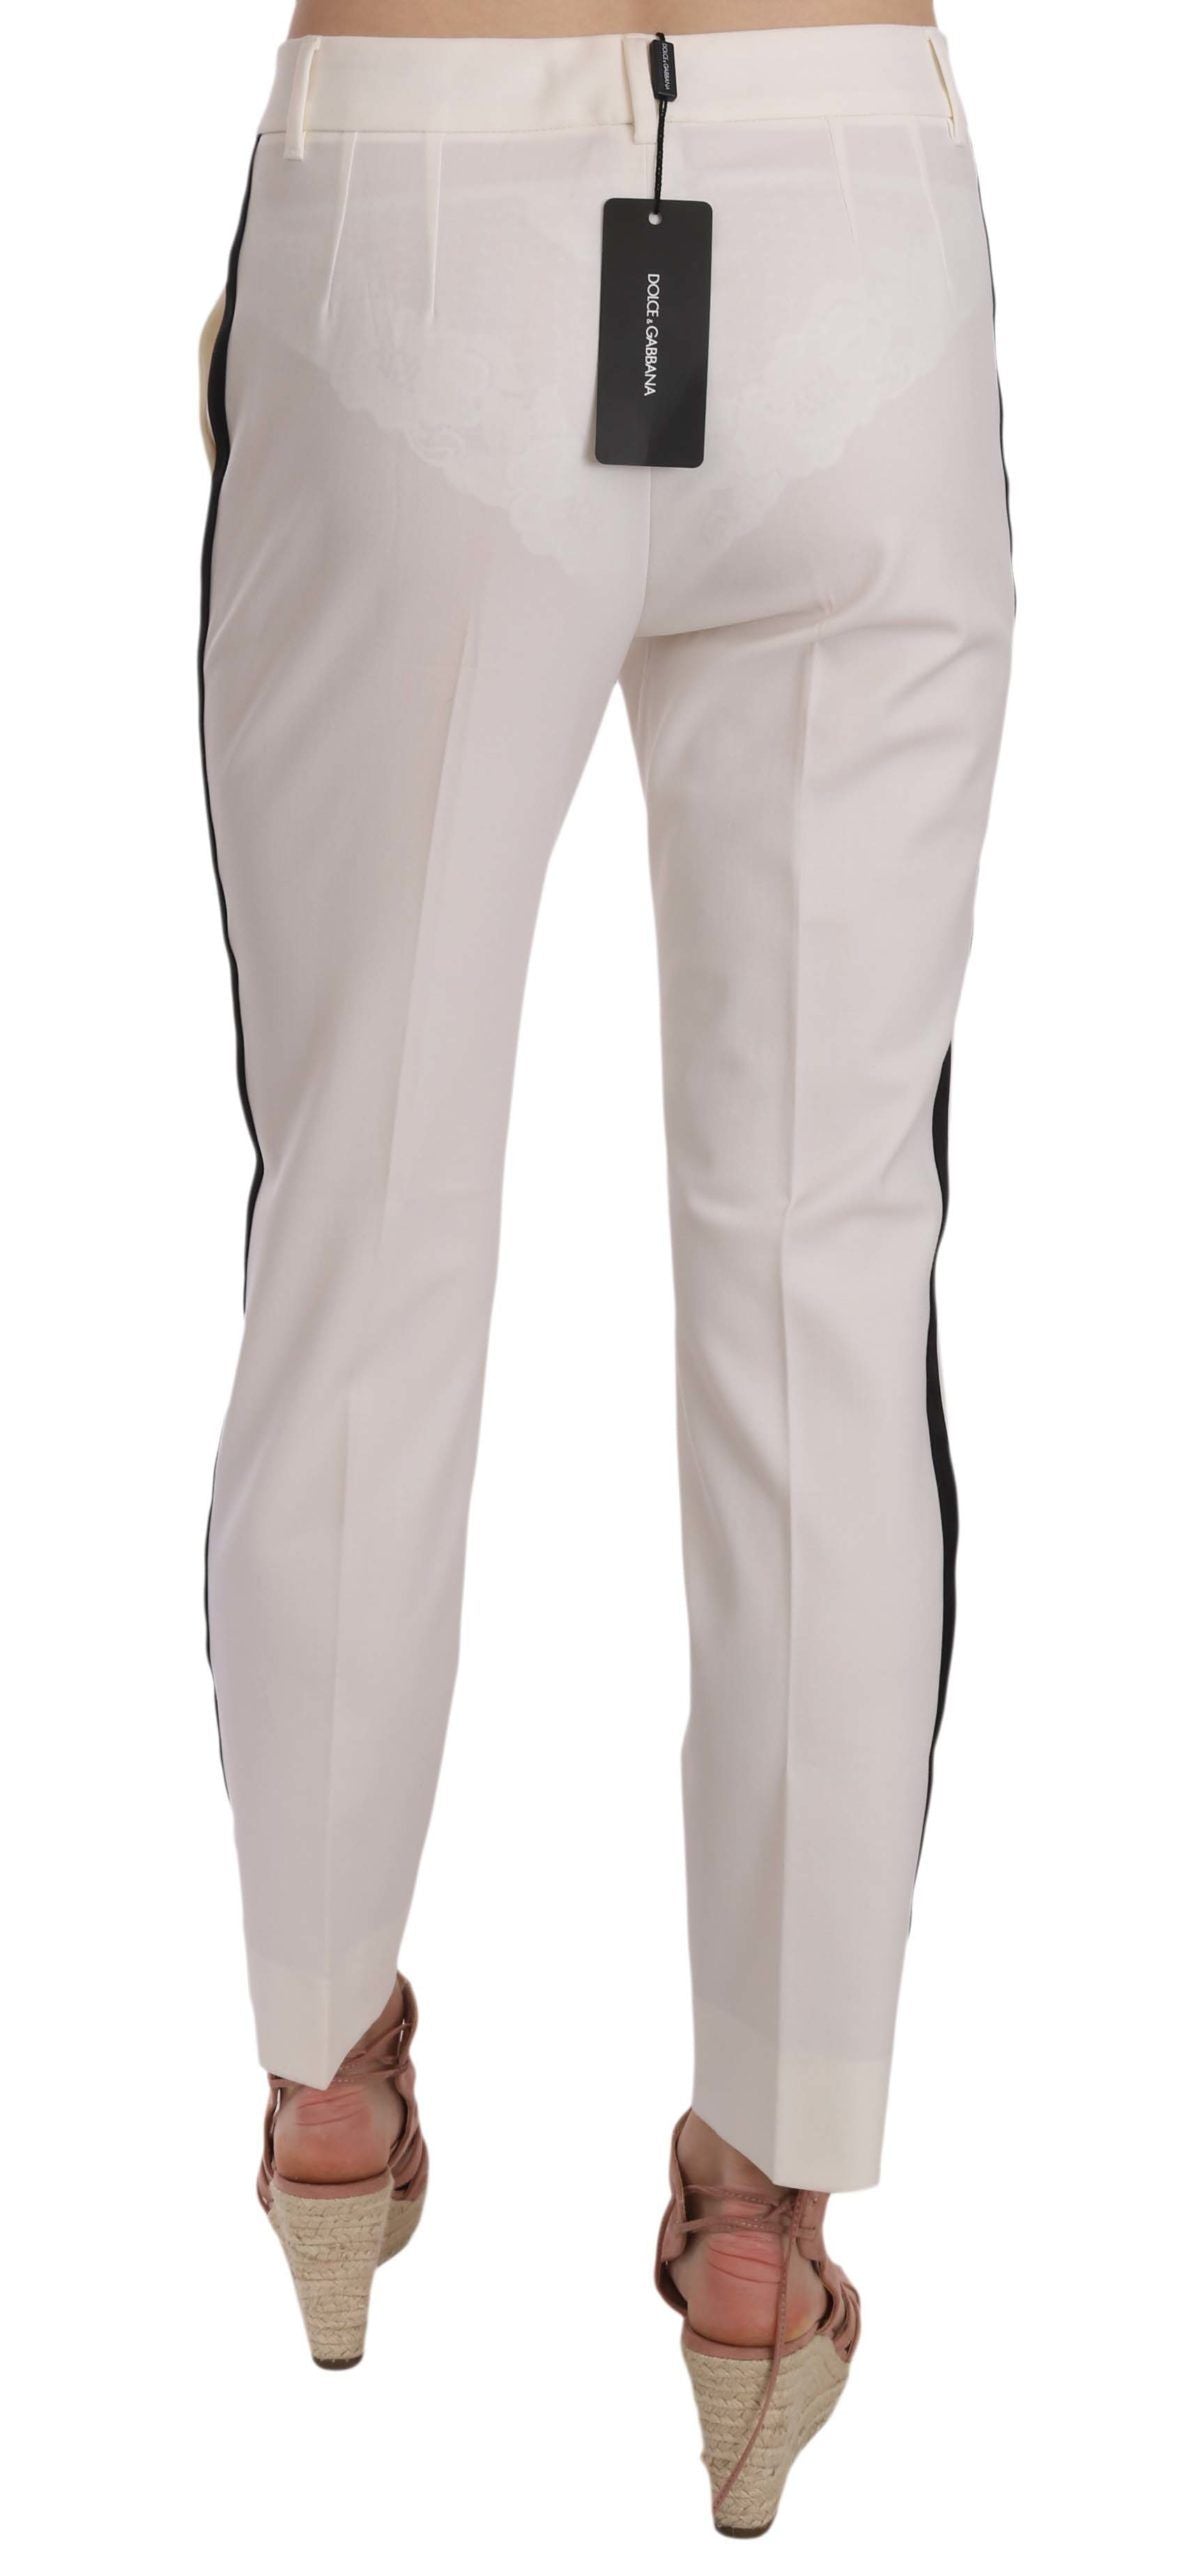 White Side Stripe Wool Tapered Trouser Pants